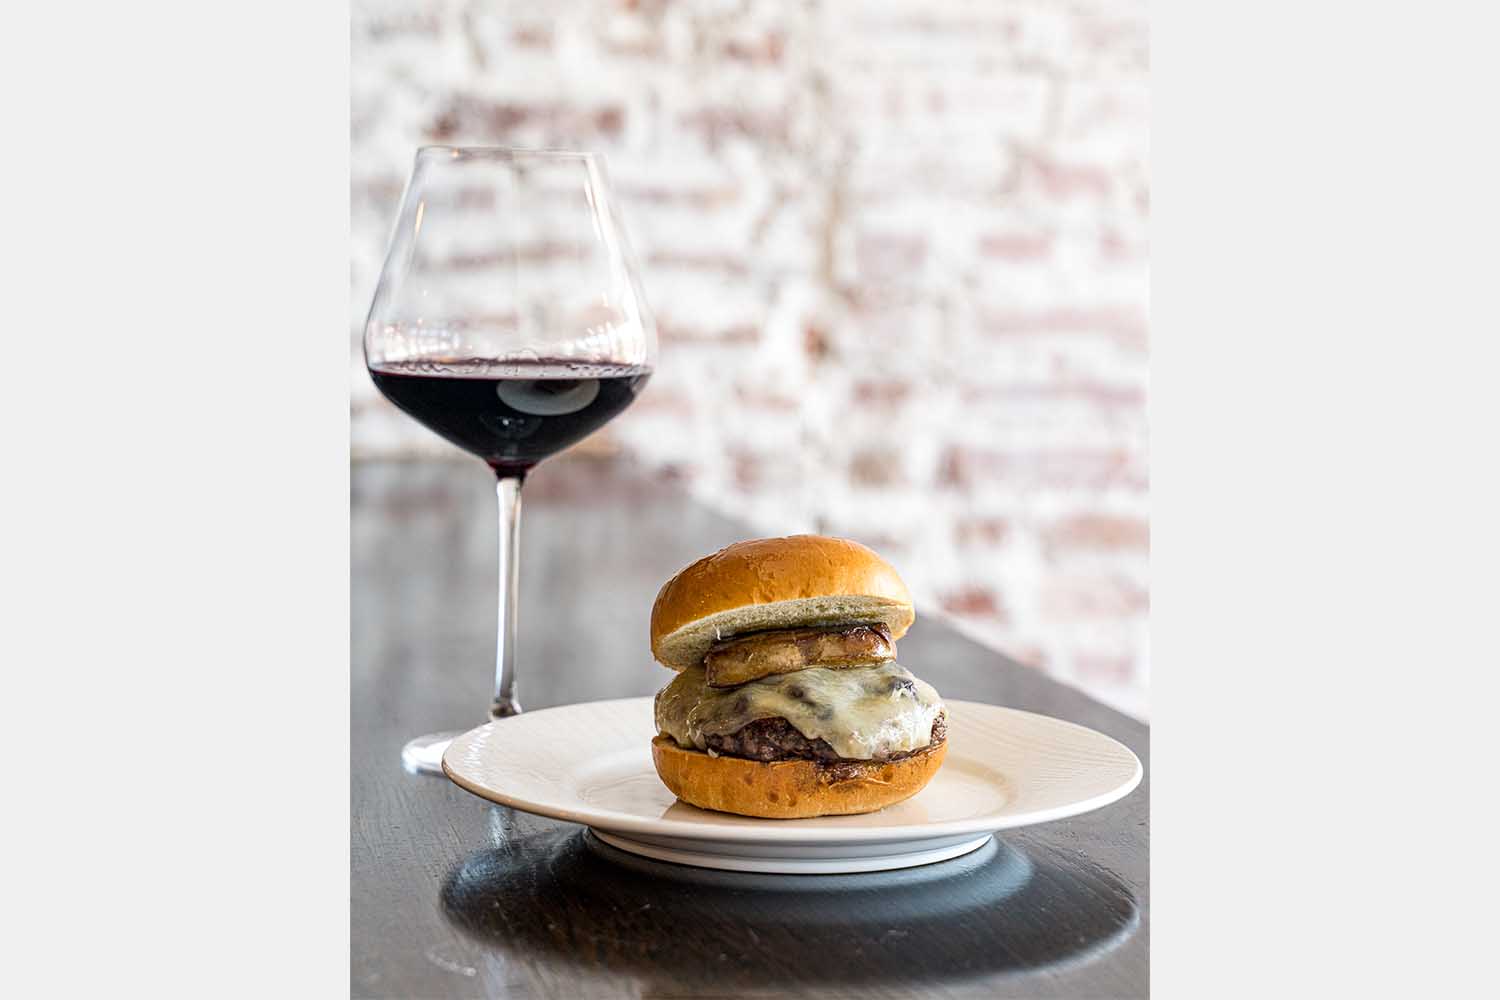 A burger and glass of red wine from DC's Duck Duck Goose 